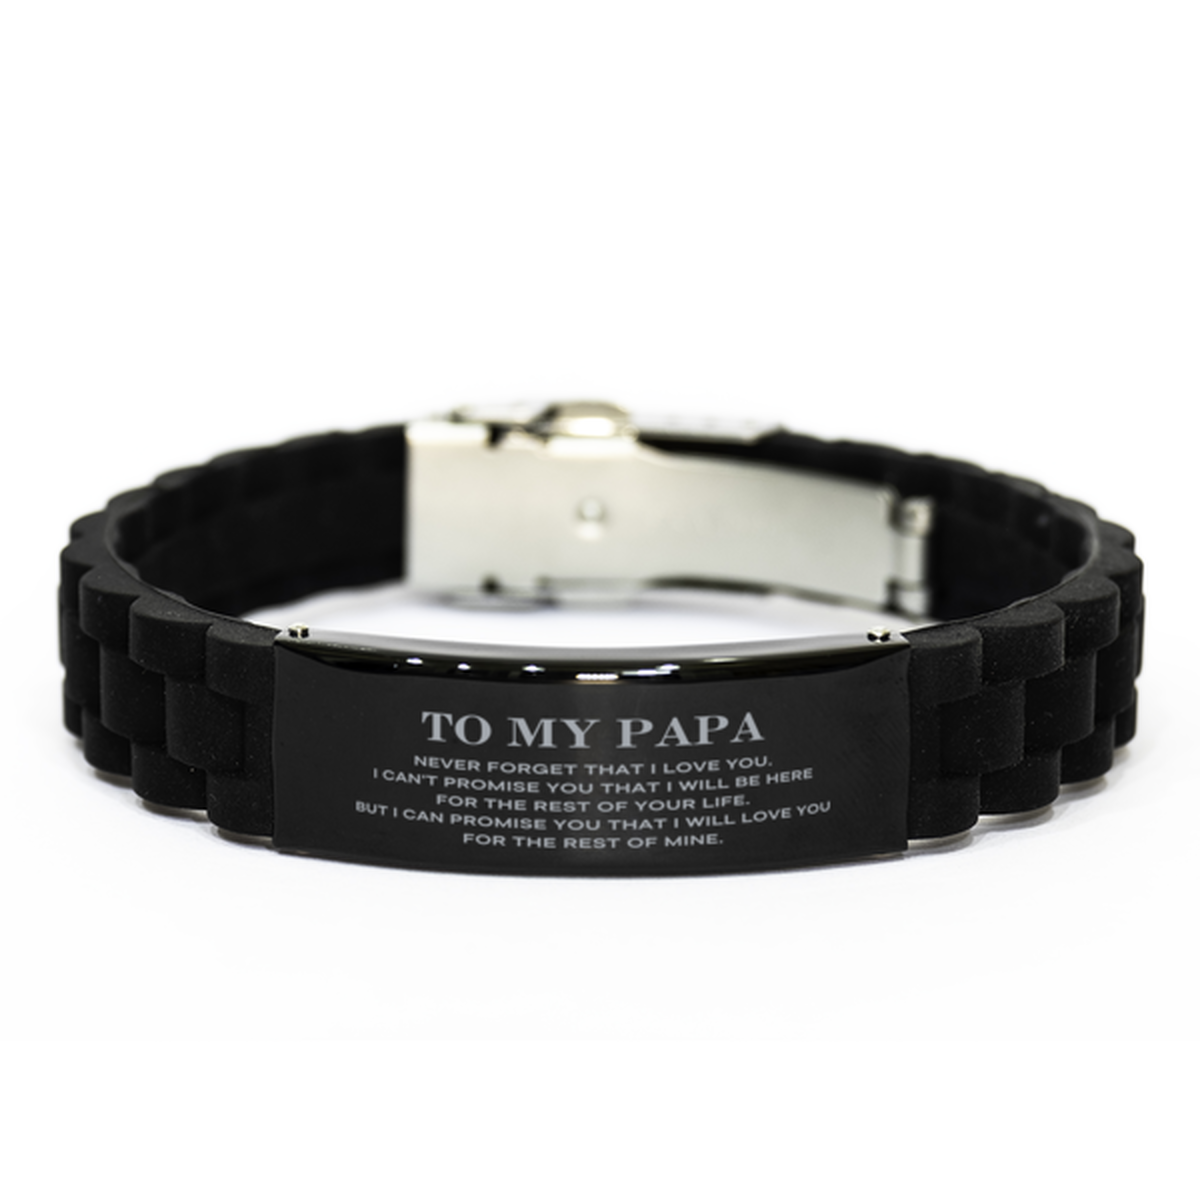 To My Papa Gifts, I will love you for the rest of mine, Love Papa Bracelet, Birthday Christmas Unique Black Glidelock Clasp Bracelet For Papa